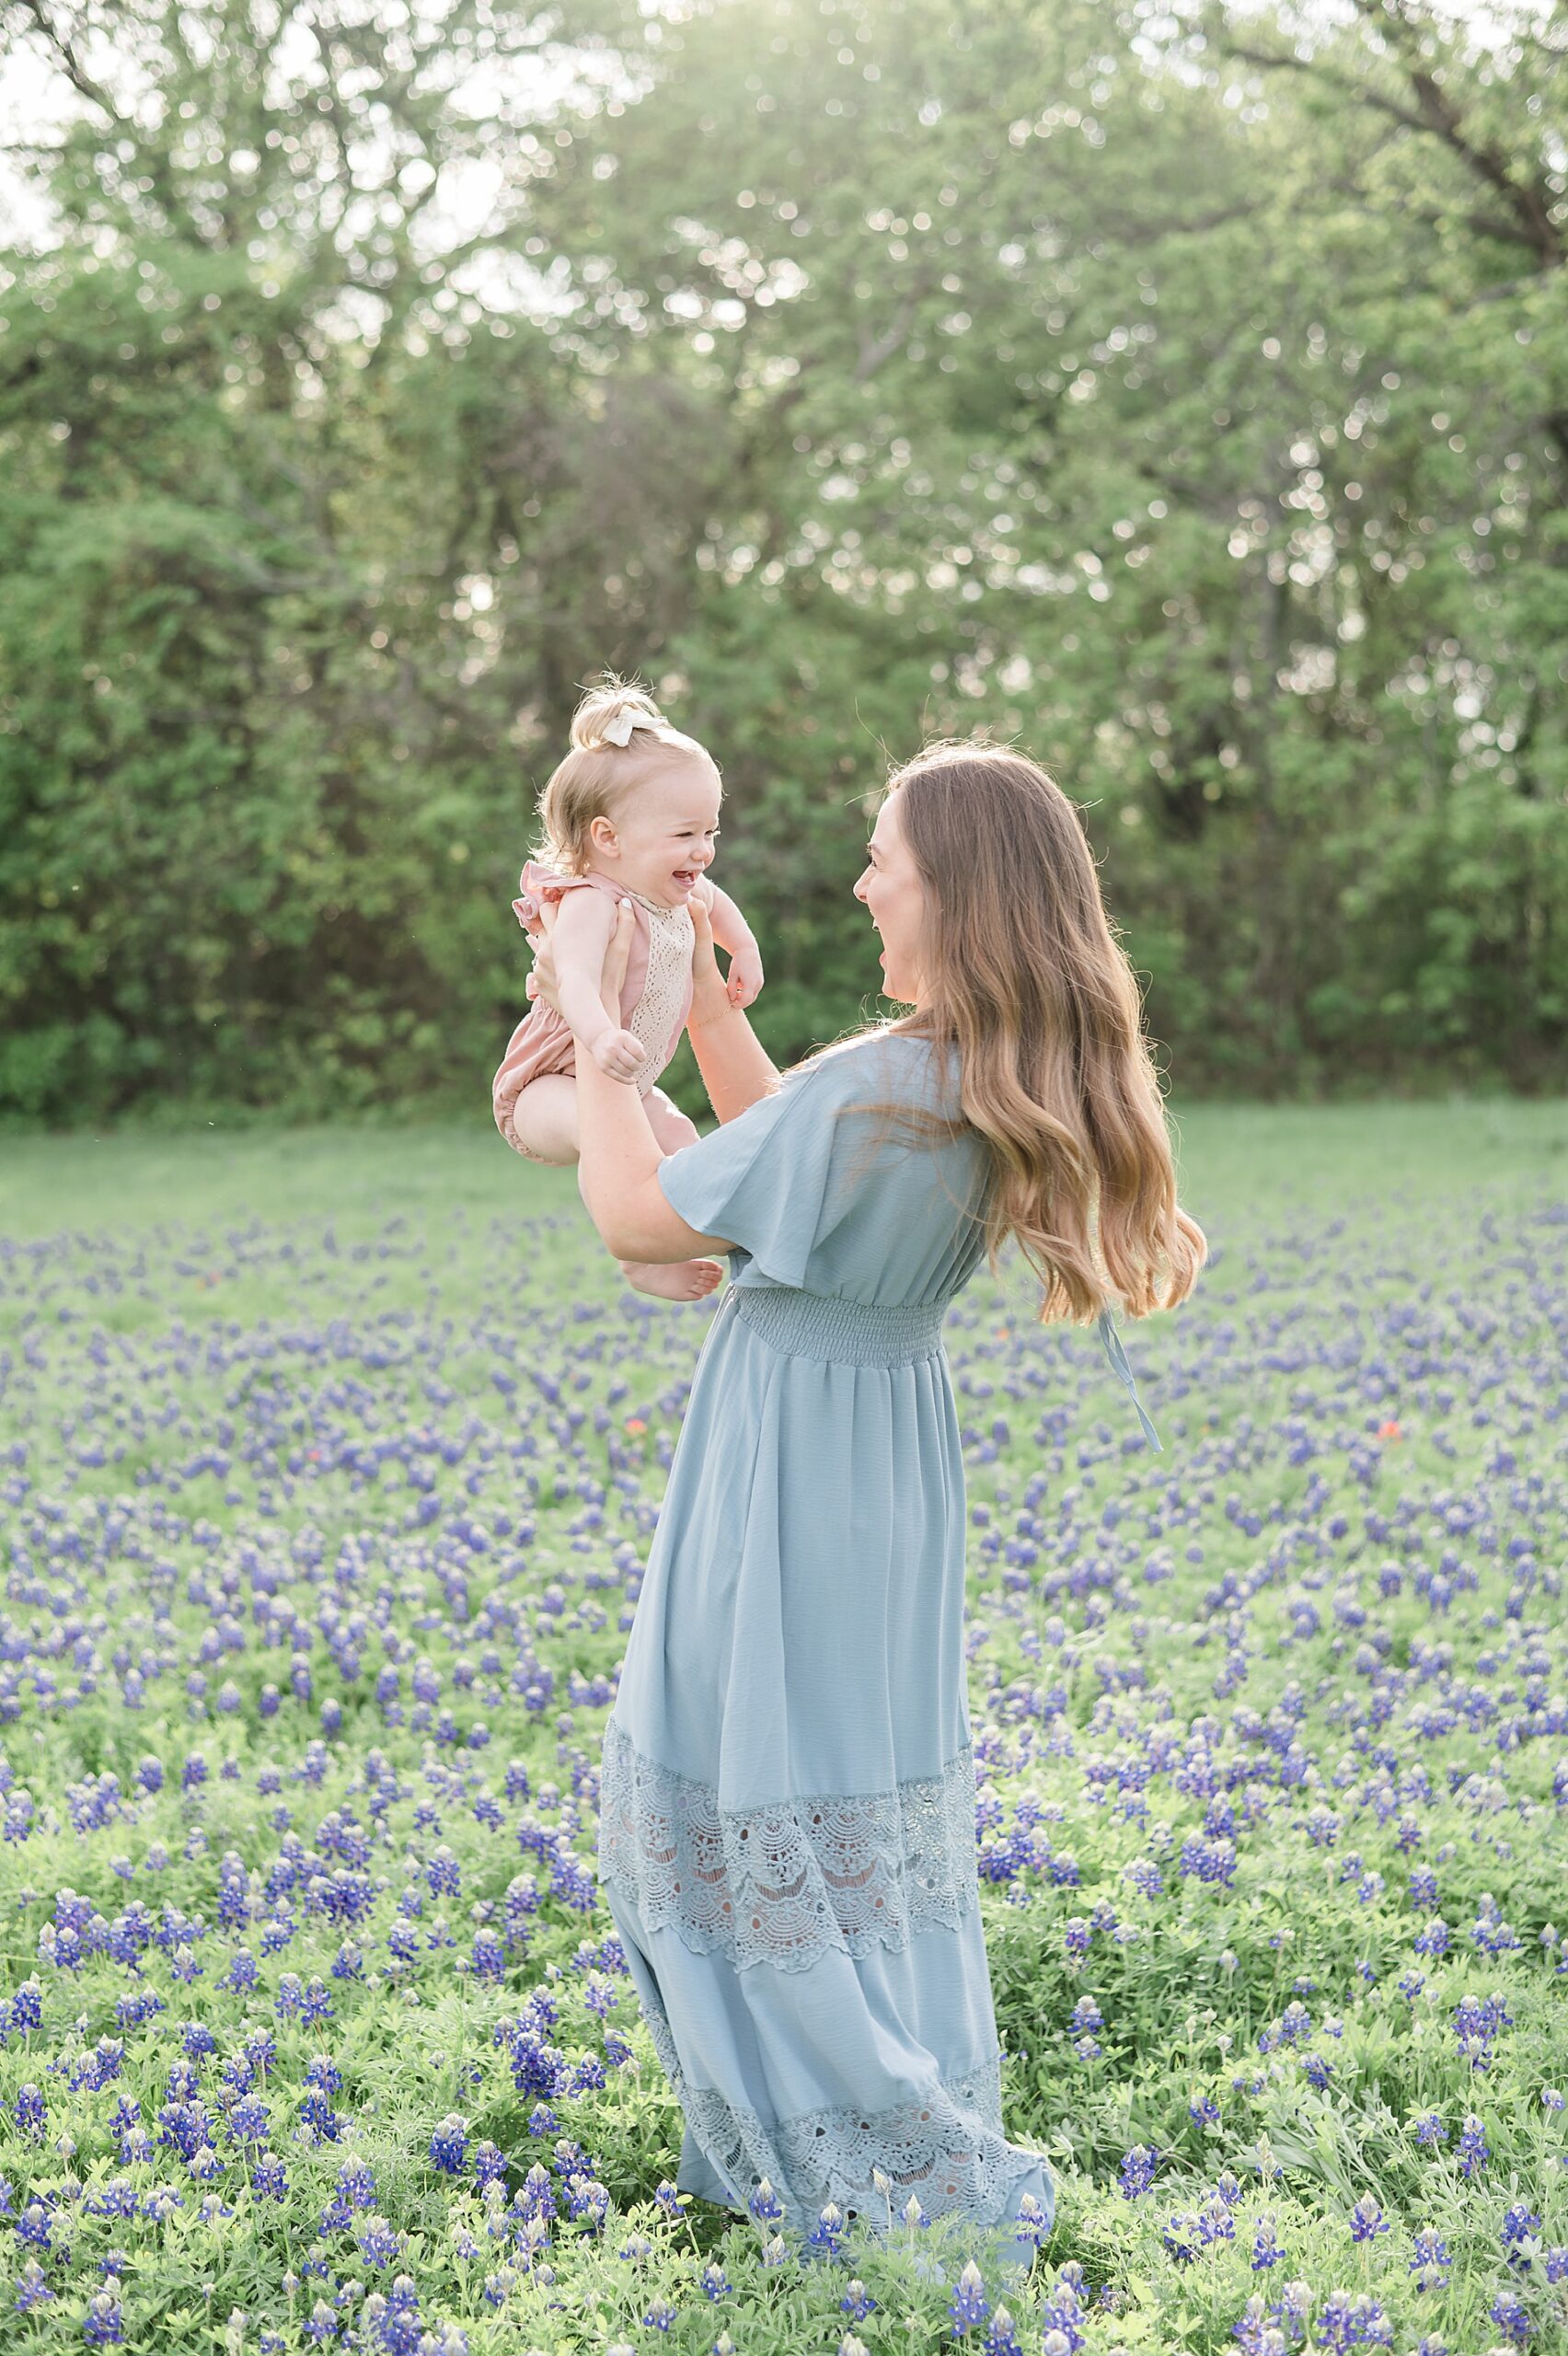 mom holds little girl as she giggles taken by Lindsey Dutton Photography, a Dallas family photographer